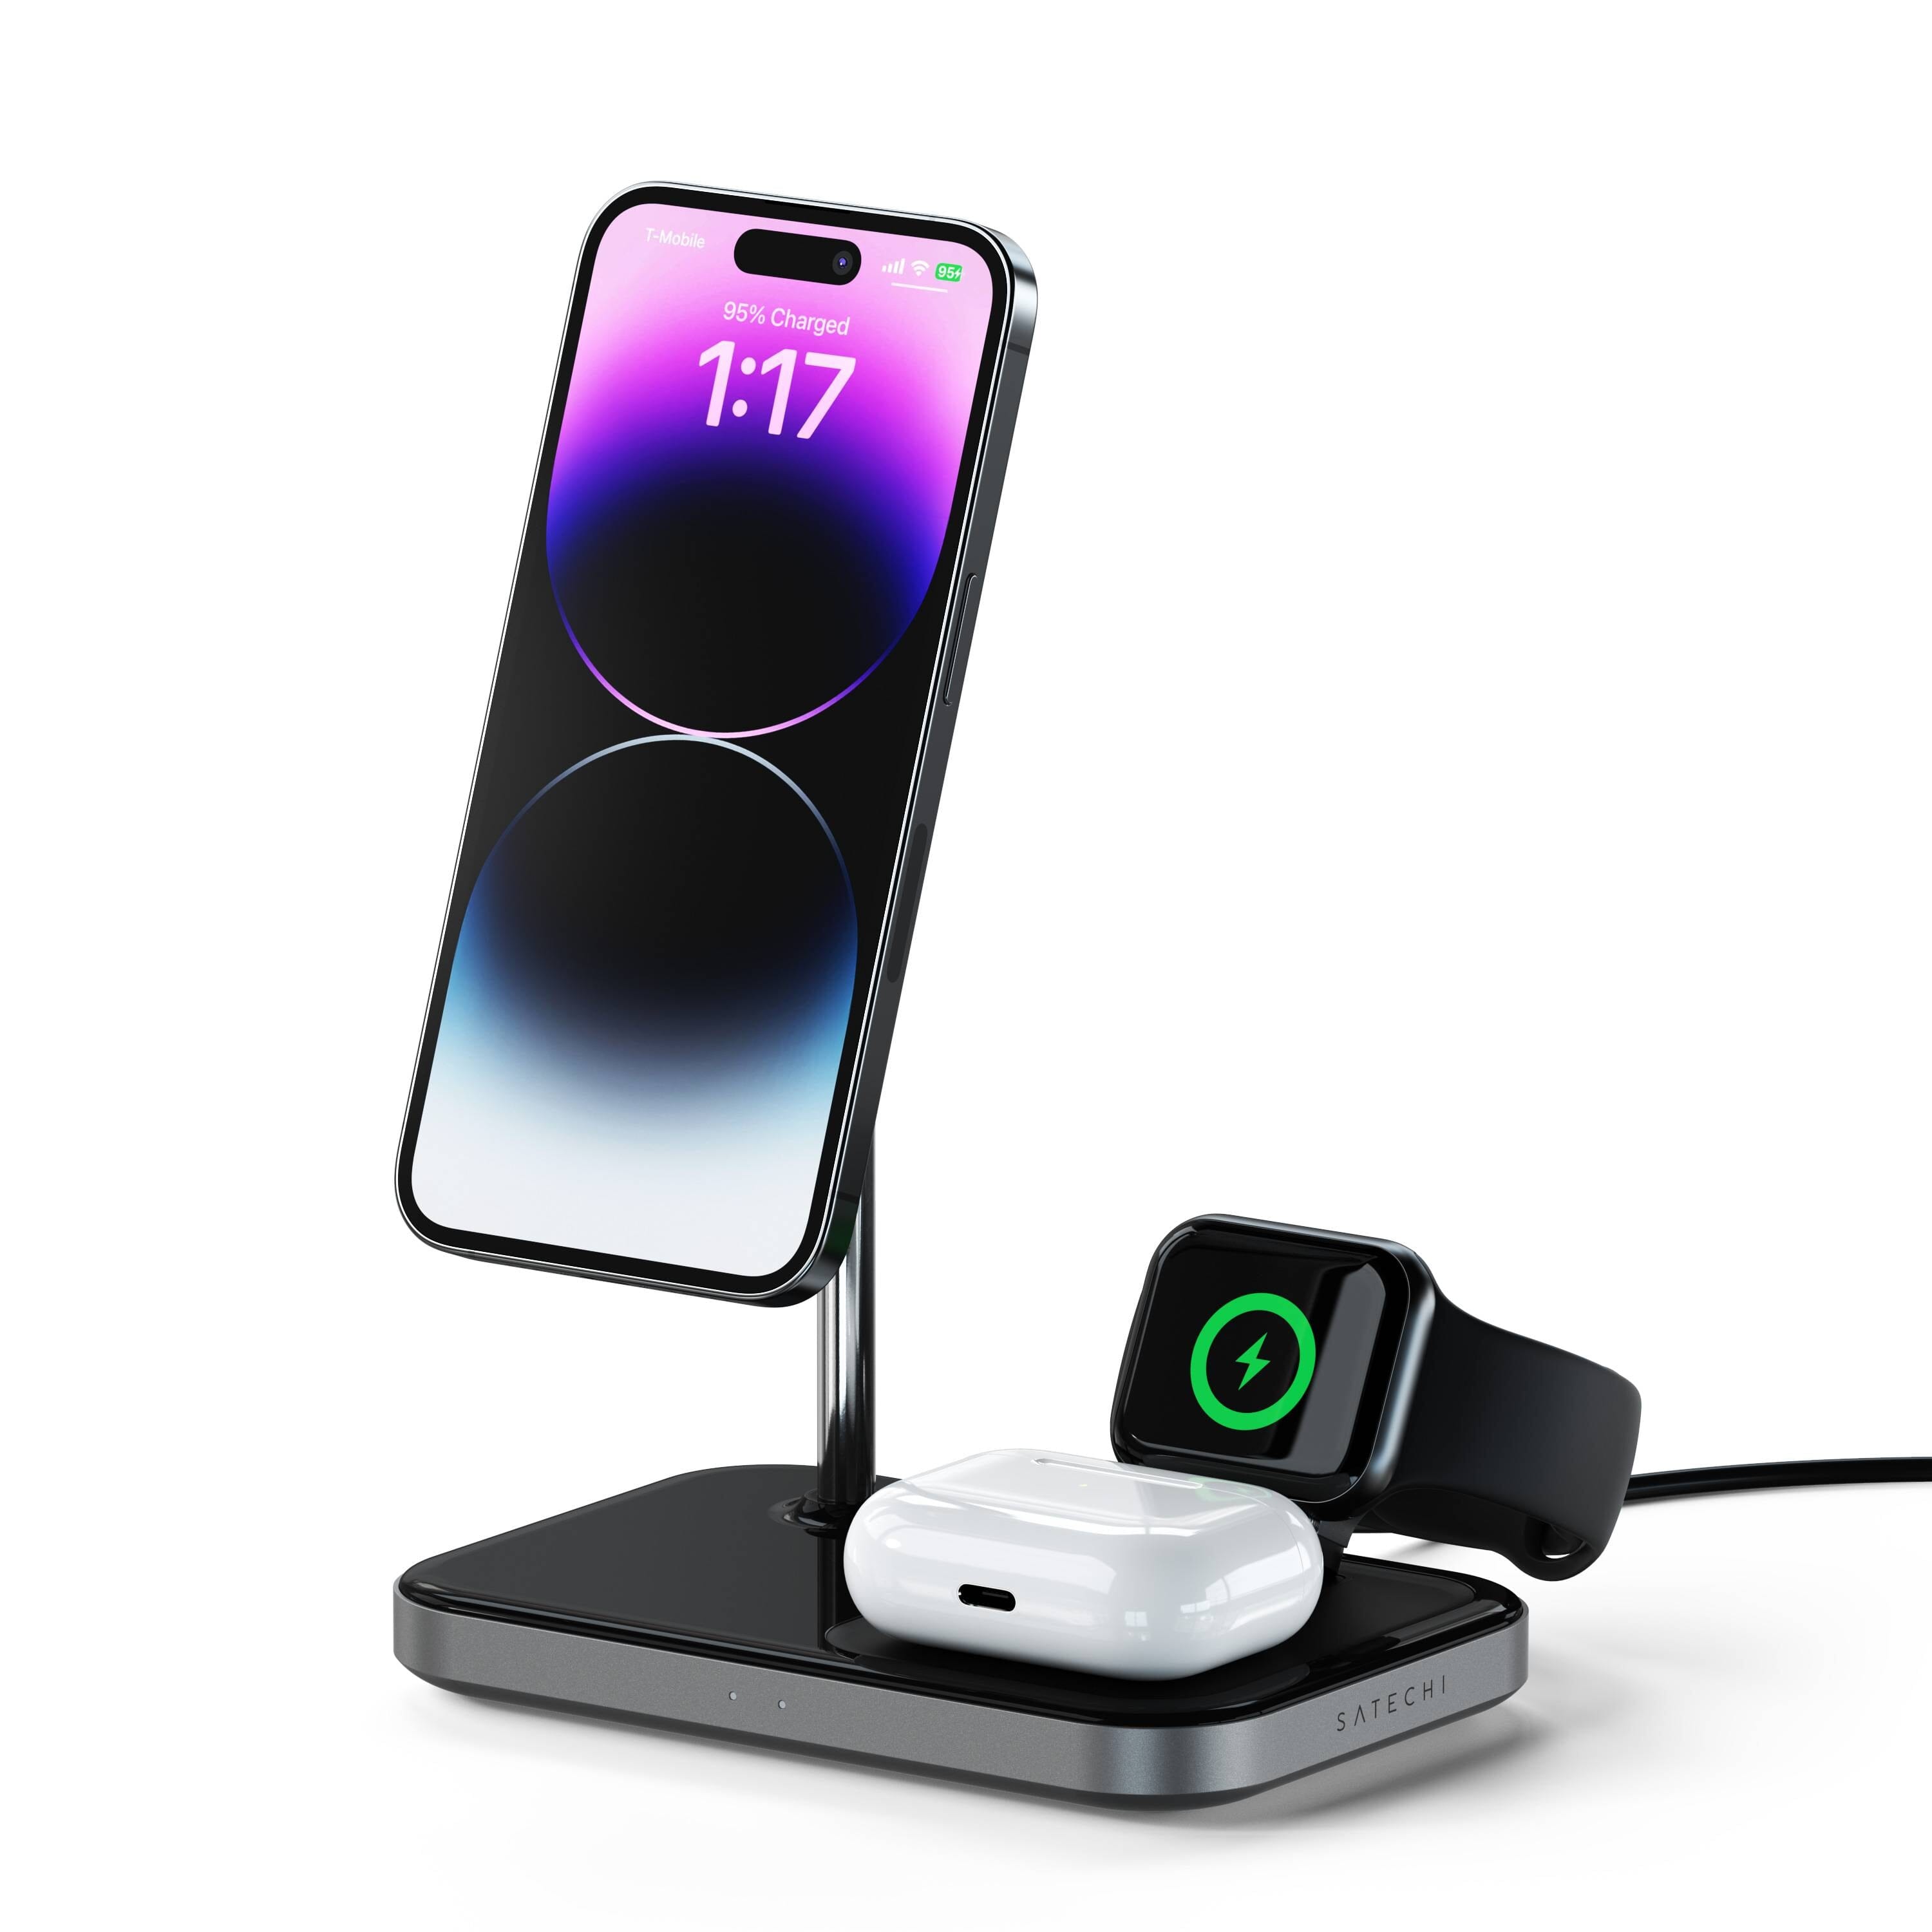 This sleek magnetic iPhone charger is totally wireless and only